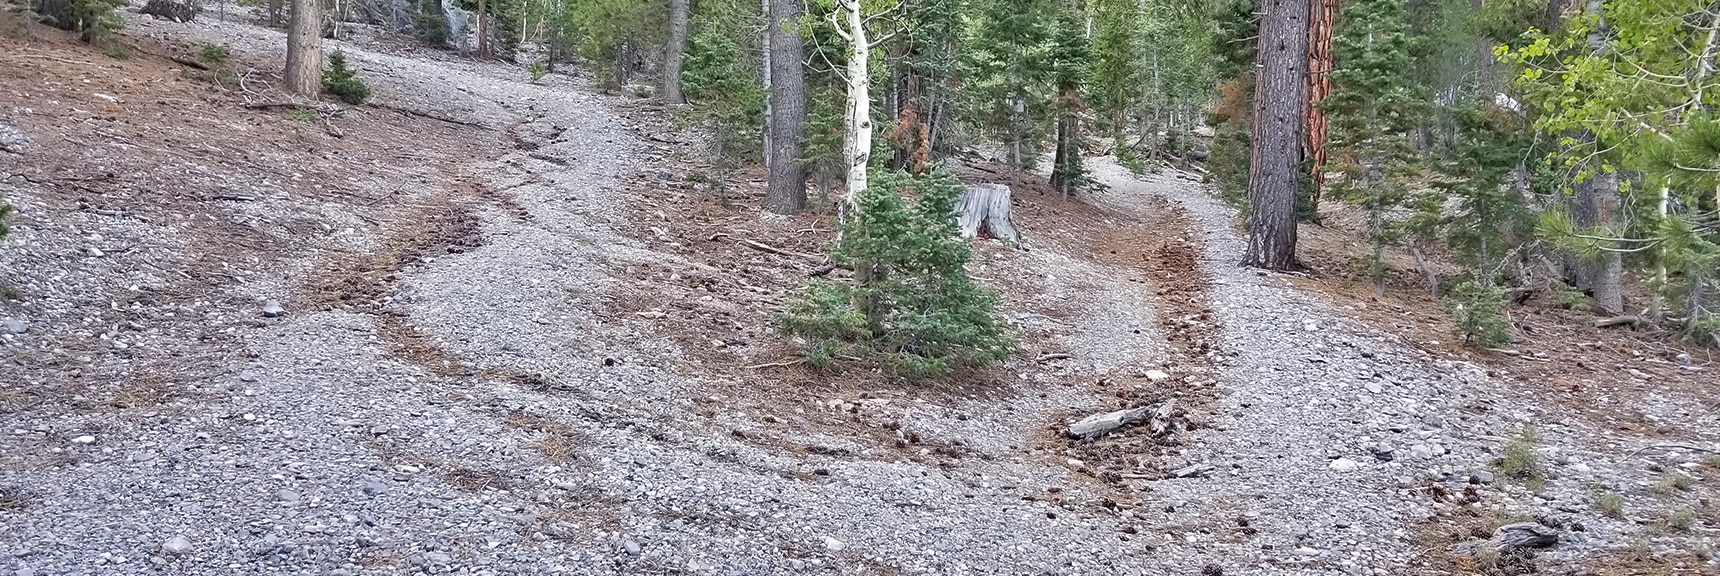 4WD Road Splits, Take Right Branch Toward Approach Wash | Mummy Mountain Summit Approach from Lee Canyon | Mt. Charleston Wilderness | Spring Mountains, Nevada